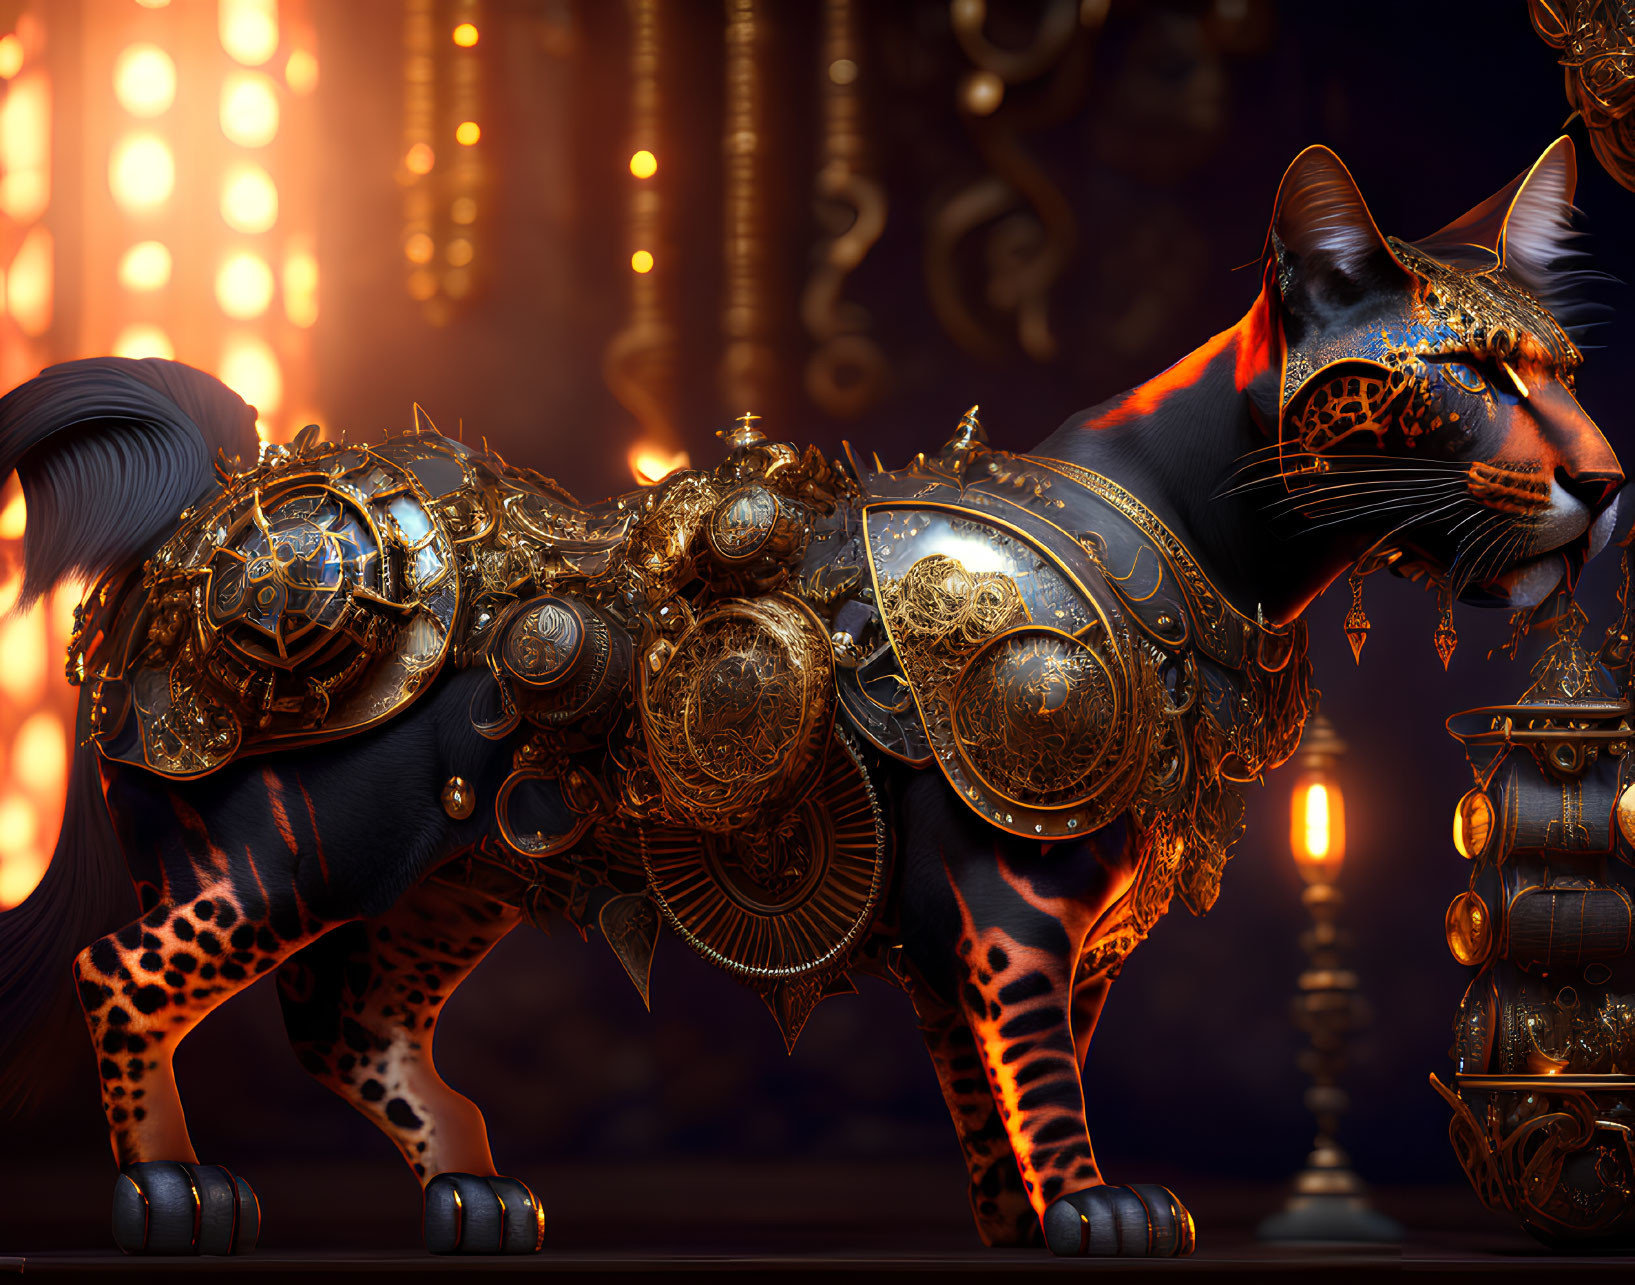 Armored cat with golden metalwork in fantasy temple setting